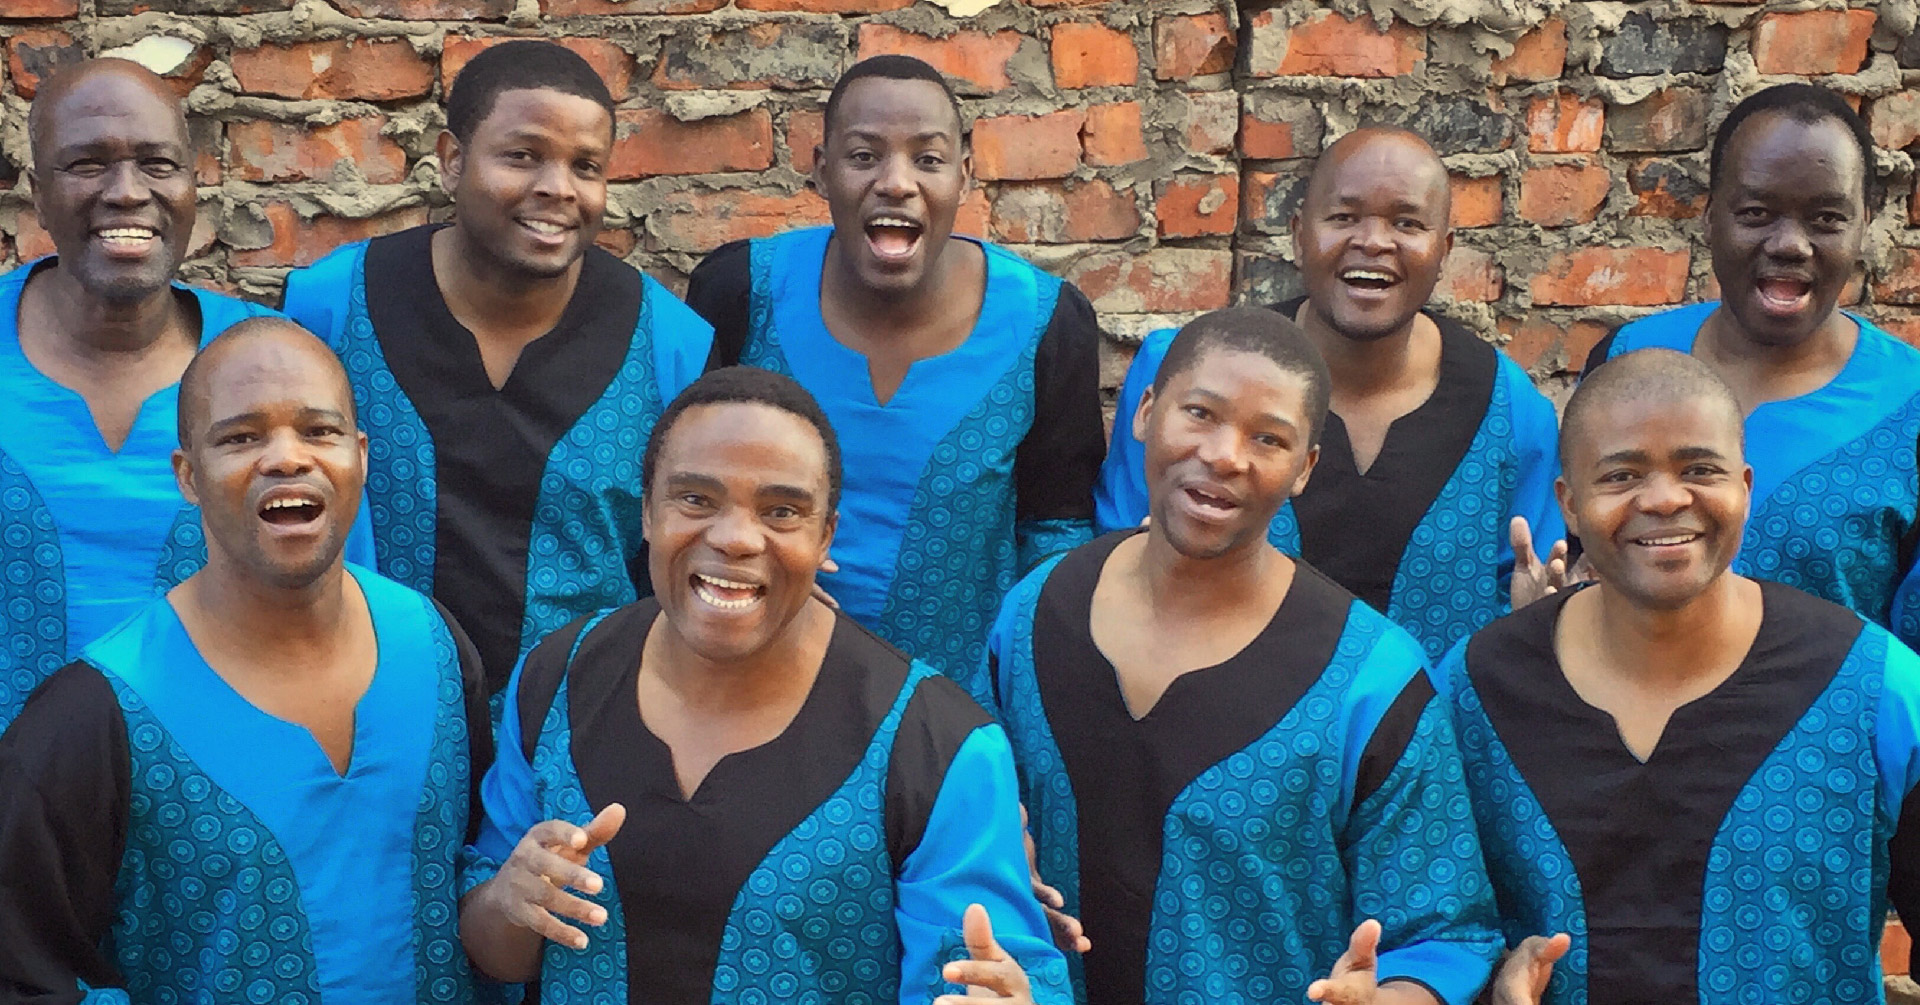 Members of Ladysmith Black Mambazo look at the camera and stand in front of a red brick wall. They wear blue and black robes. 